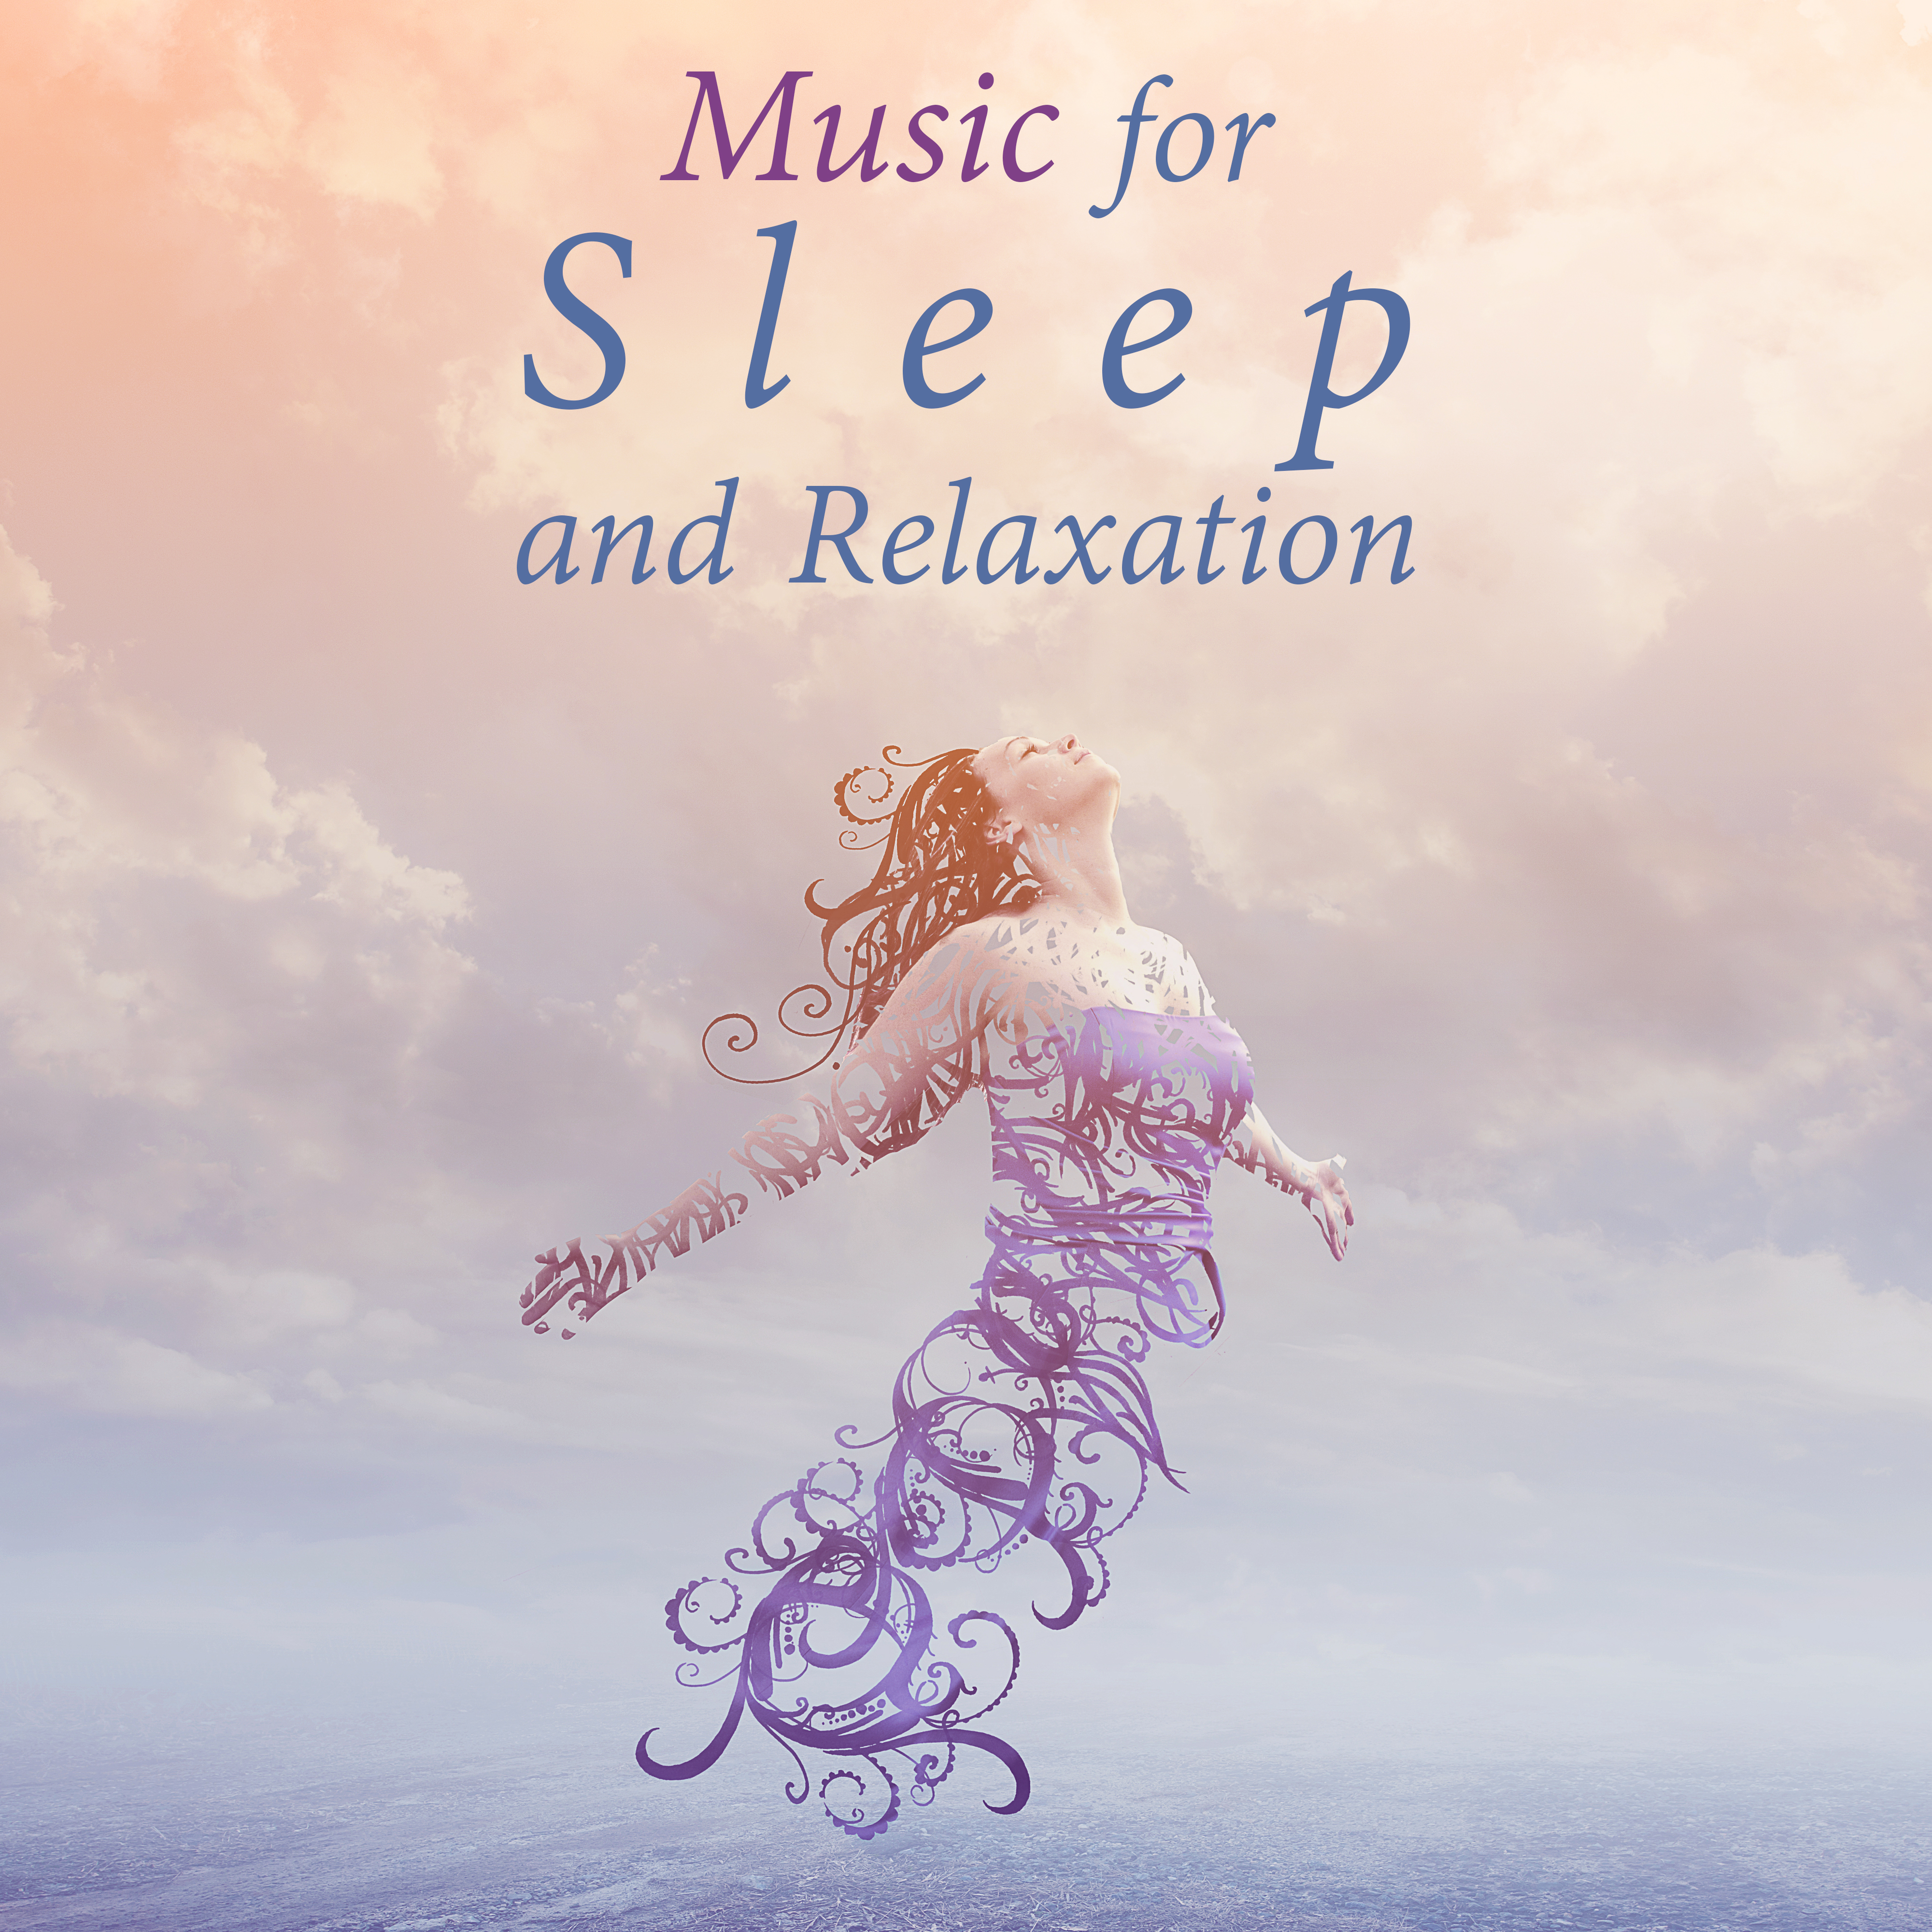 Music for Sleep and Relaxation – Peaceful Nature Sounds, Soothing Rain, Water Music, Sleep, Pure Relaxation Zone